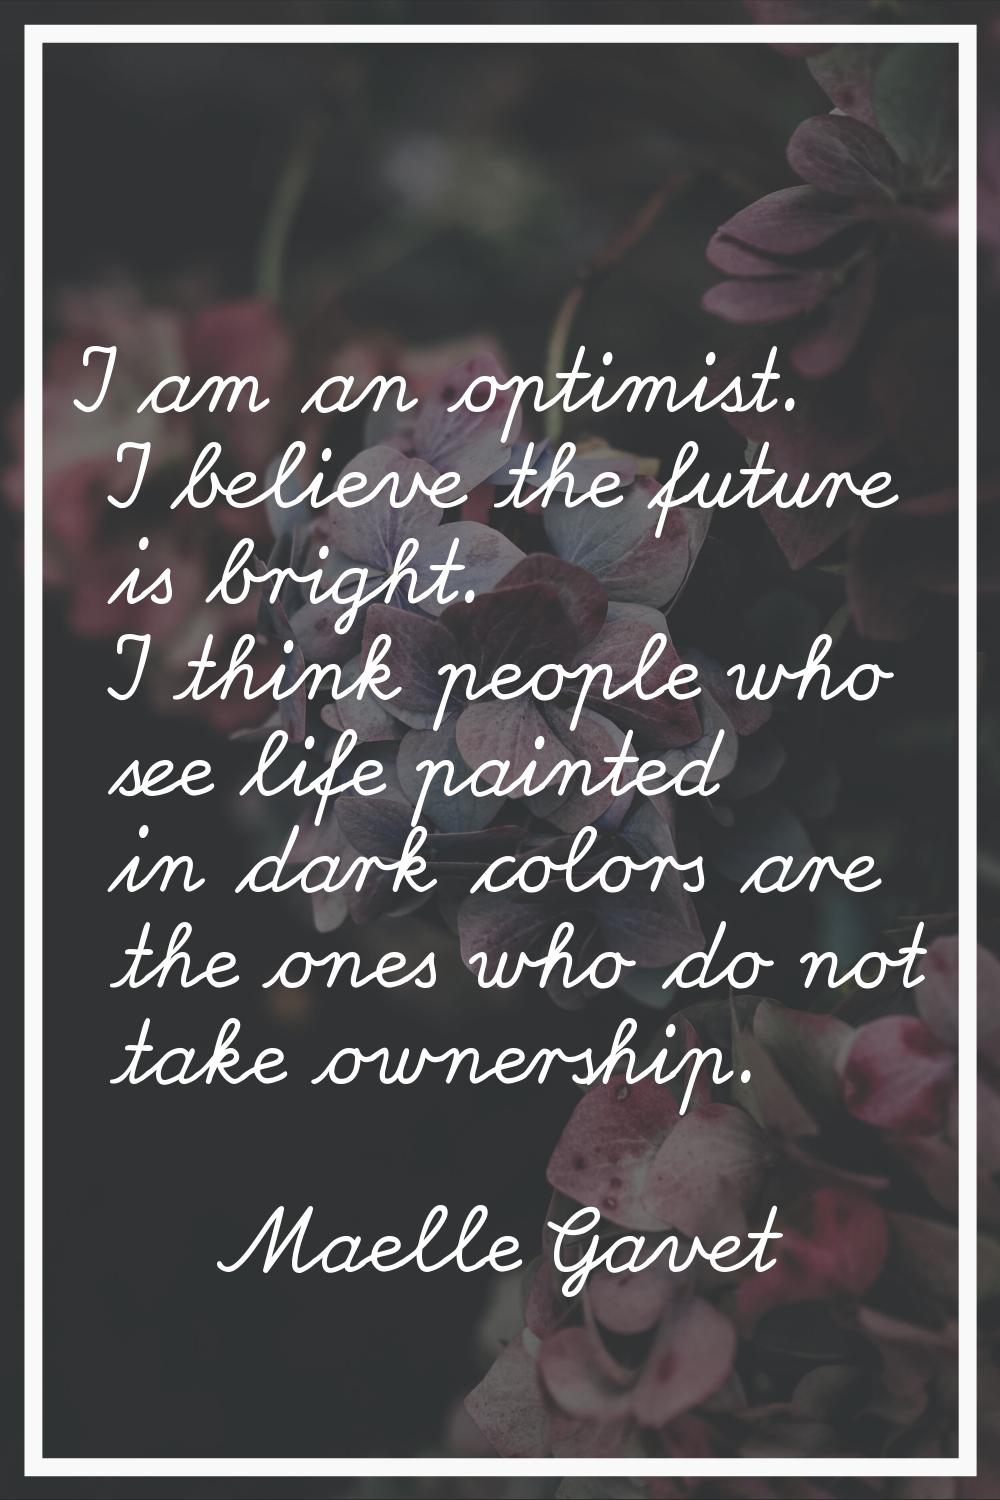 I am an optimist. I believe the future is bright. I think people who see life painted in dark color